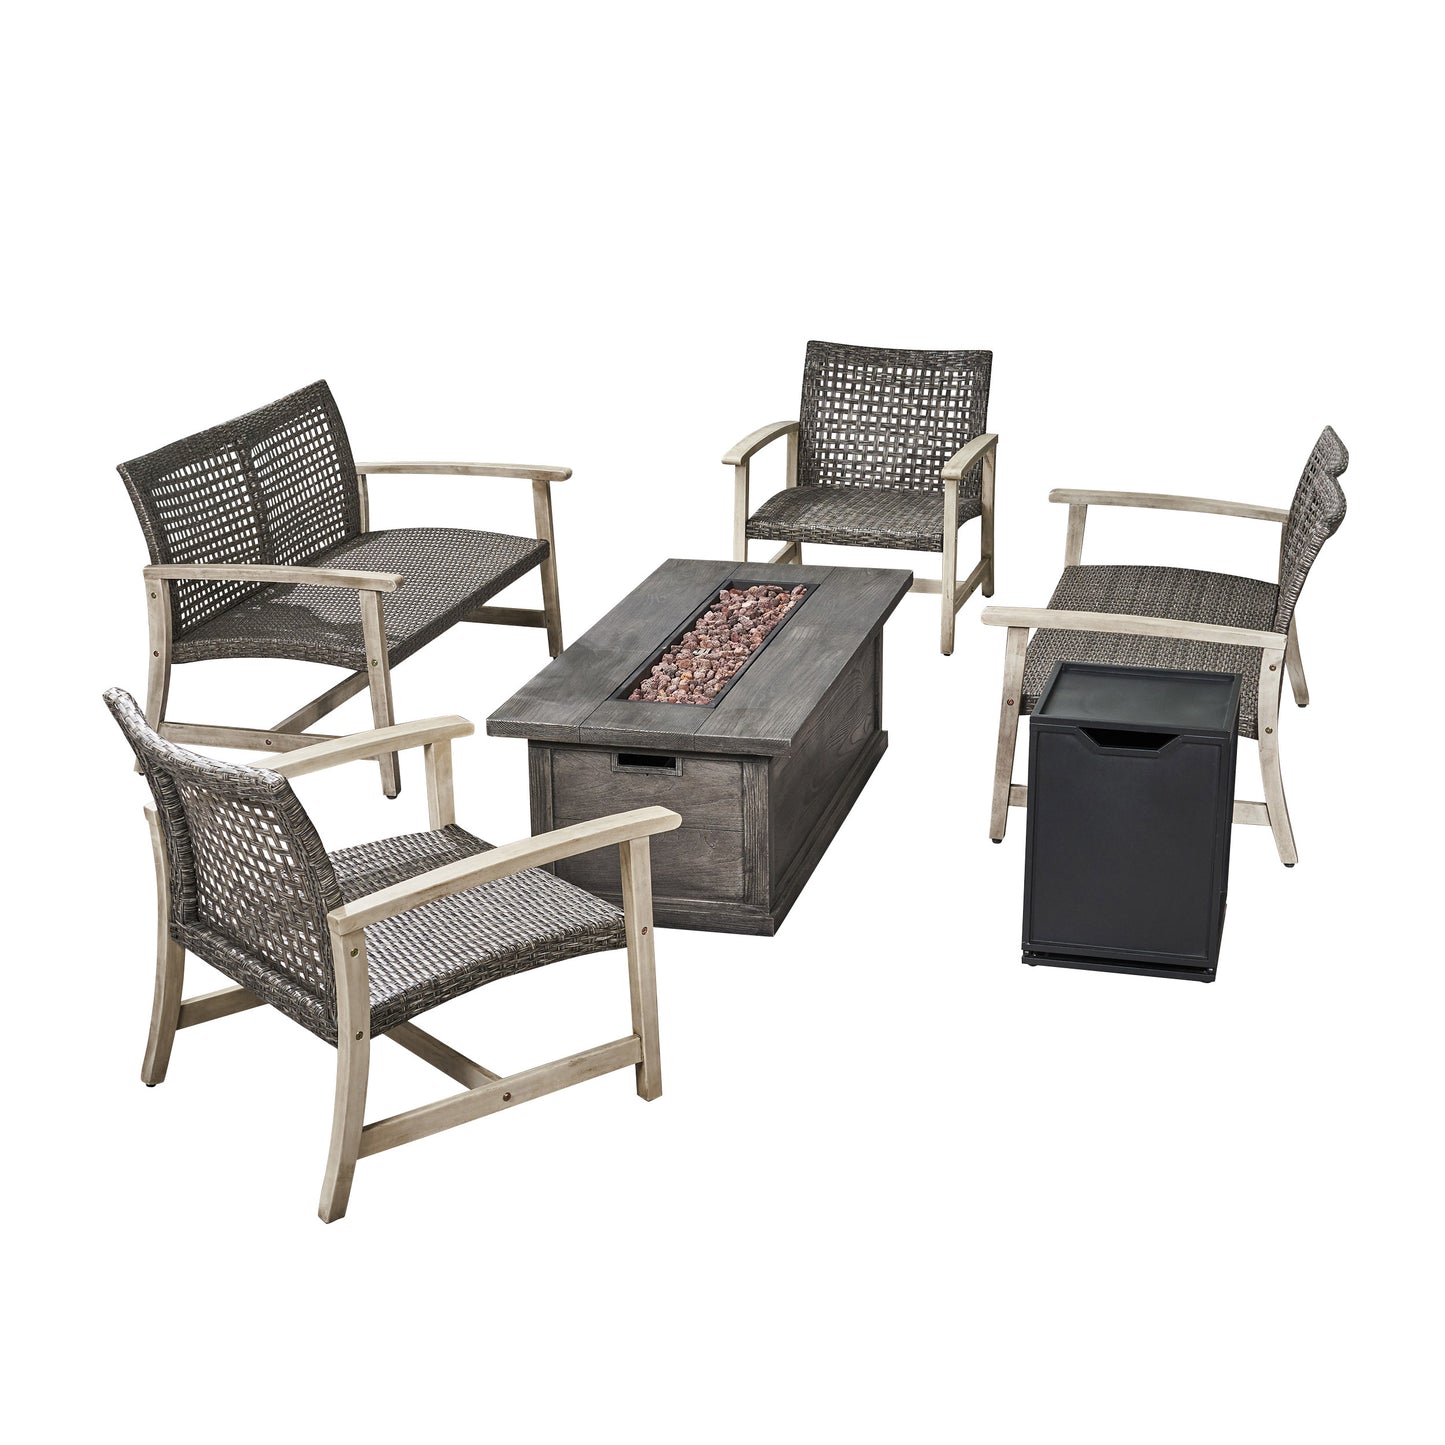 Rachel Outdoor 6 Piece Wood and Wicker Chat Set with Fire Pit